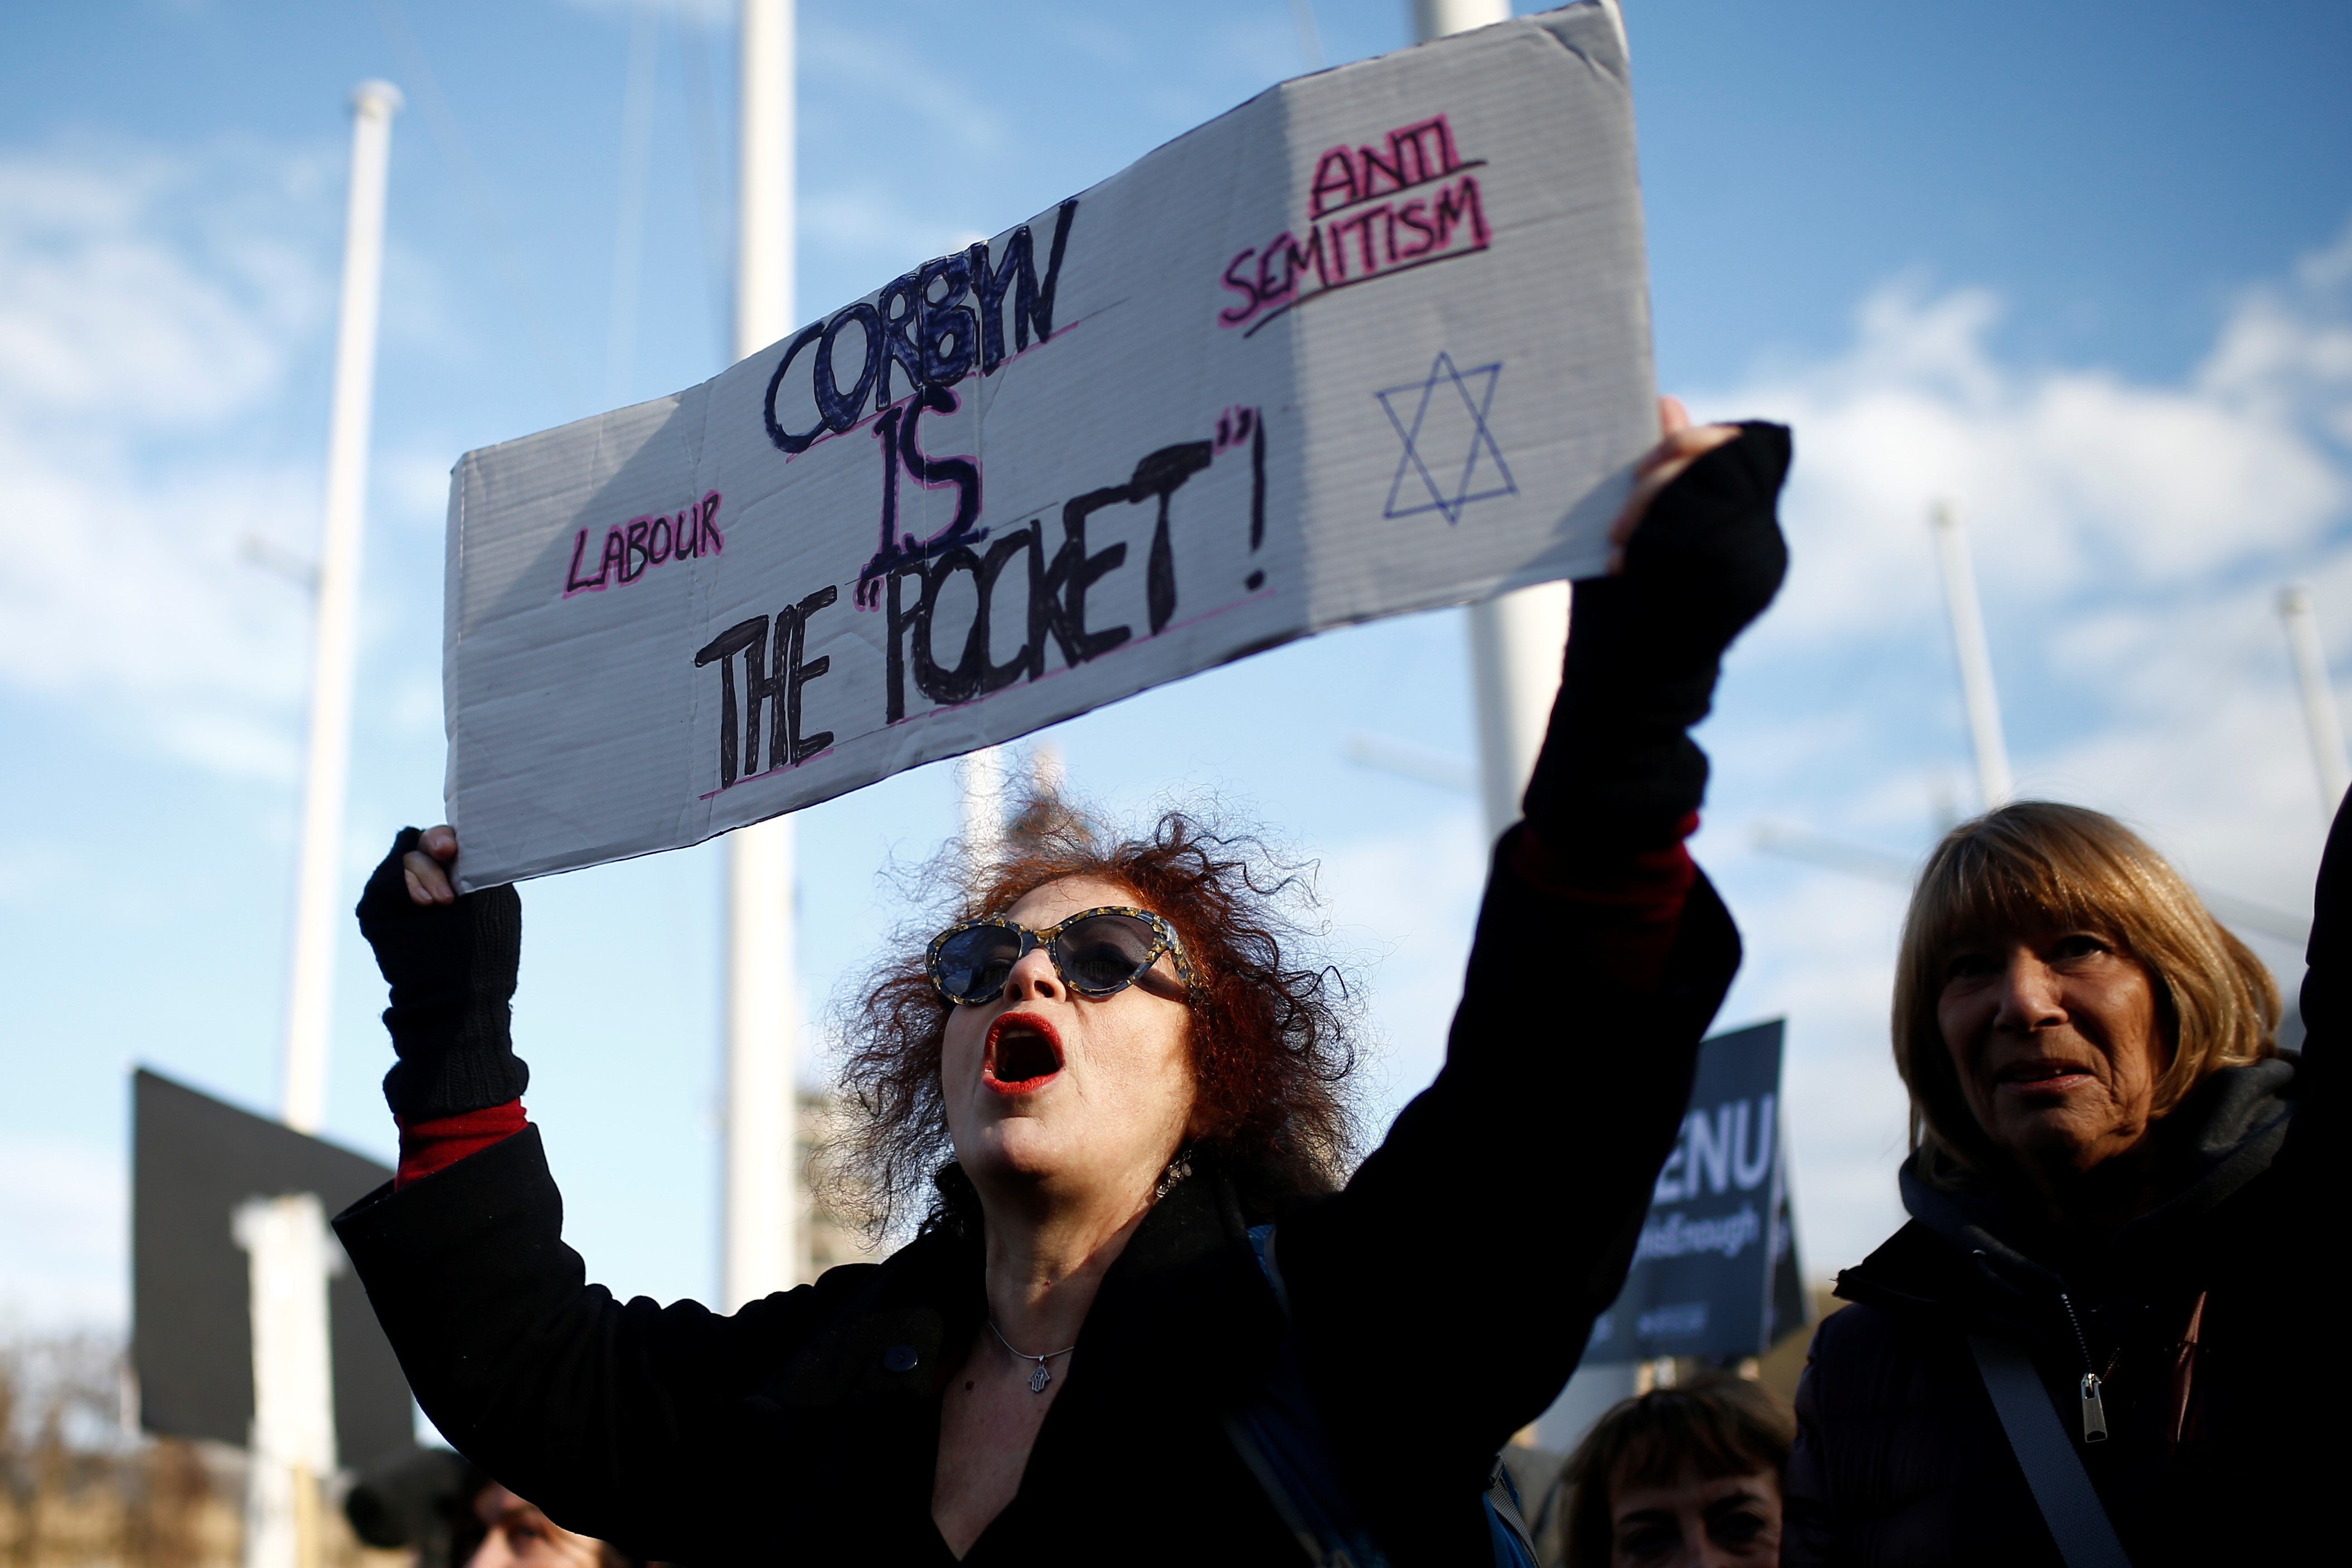 Protesters hold placards and flags during a demonstration, organised by the British Board of Jewish Deputies for those who oppose anti-Semitism, in Parliament Square in London, Britain, March 26, 2018